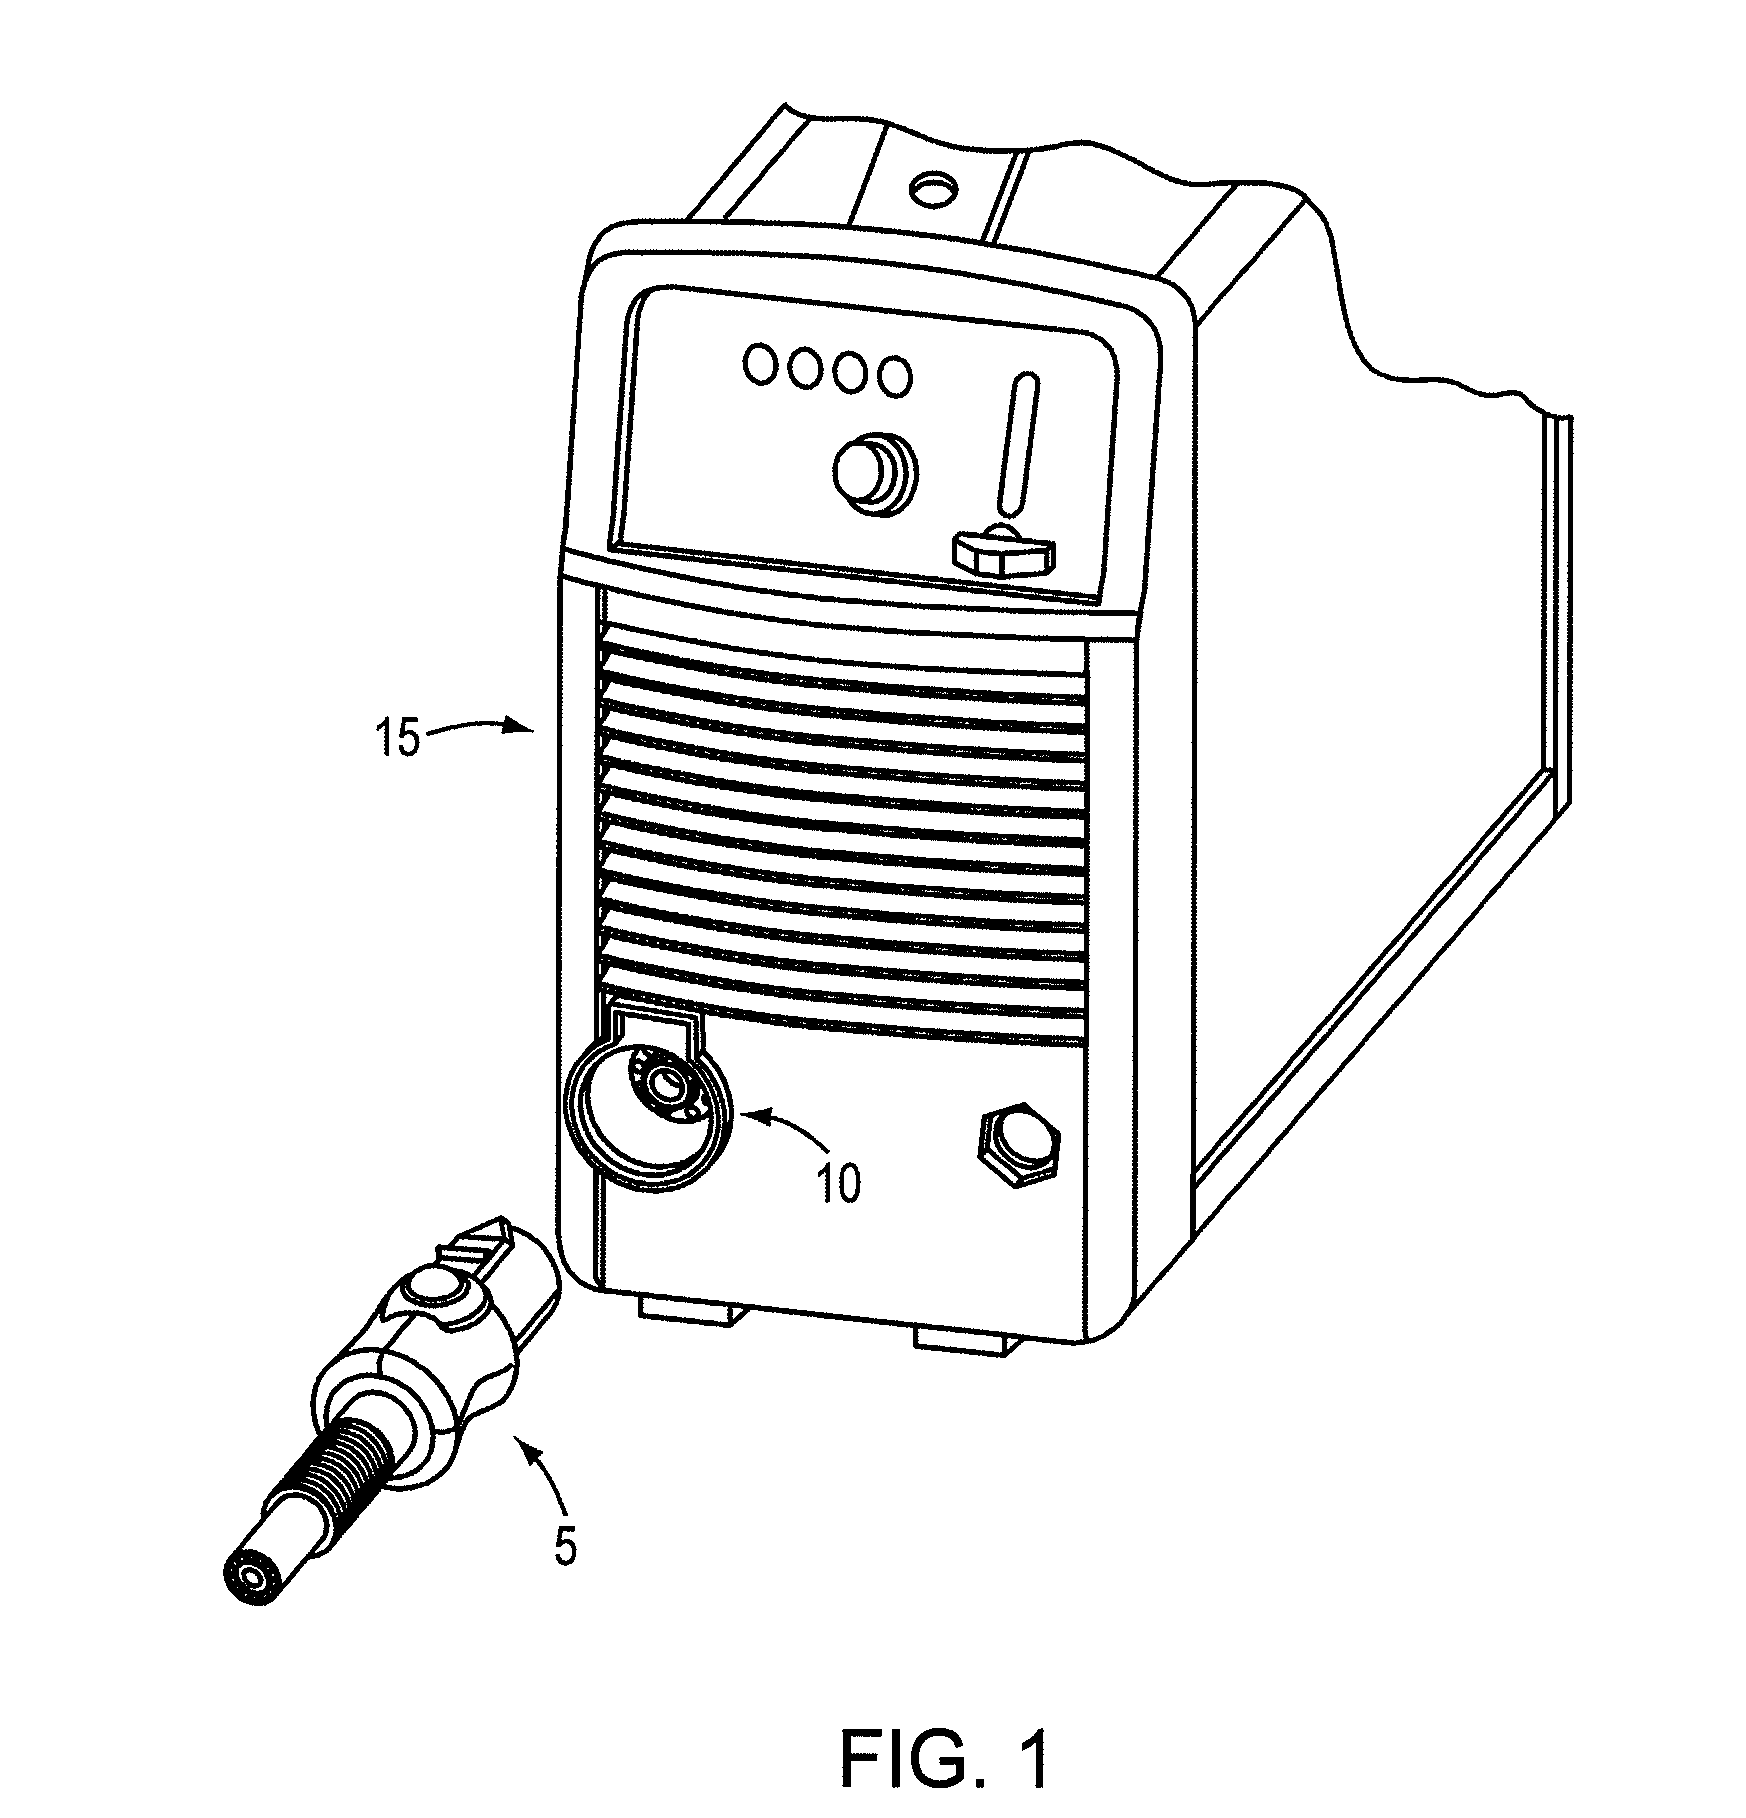 Connector for a thermal cutting system or welding system